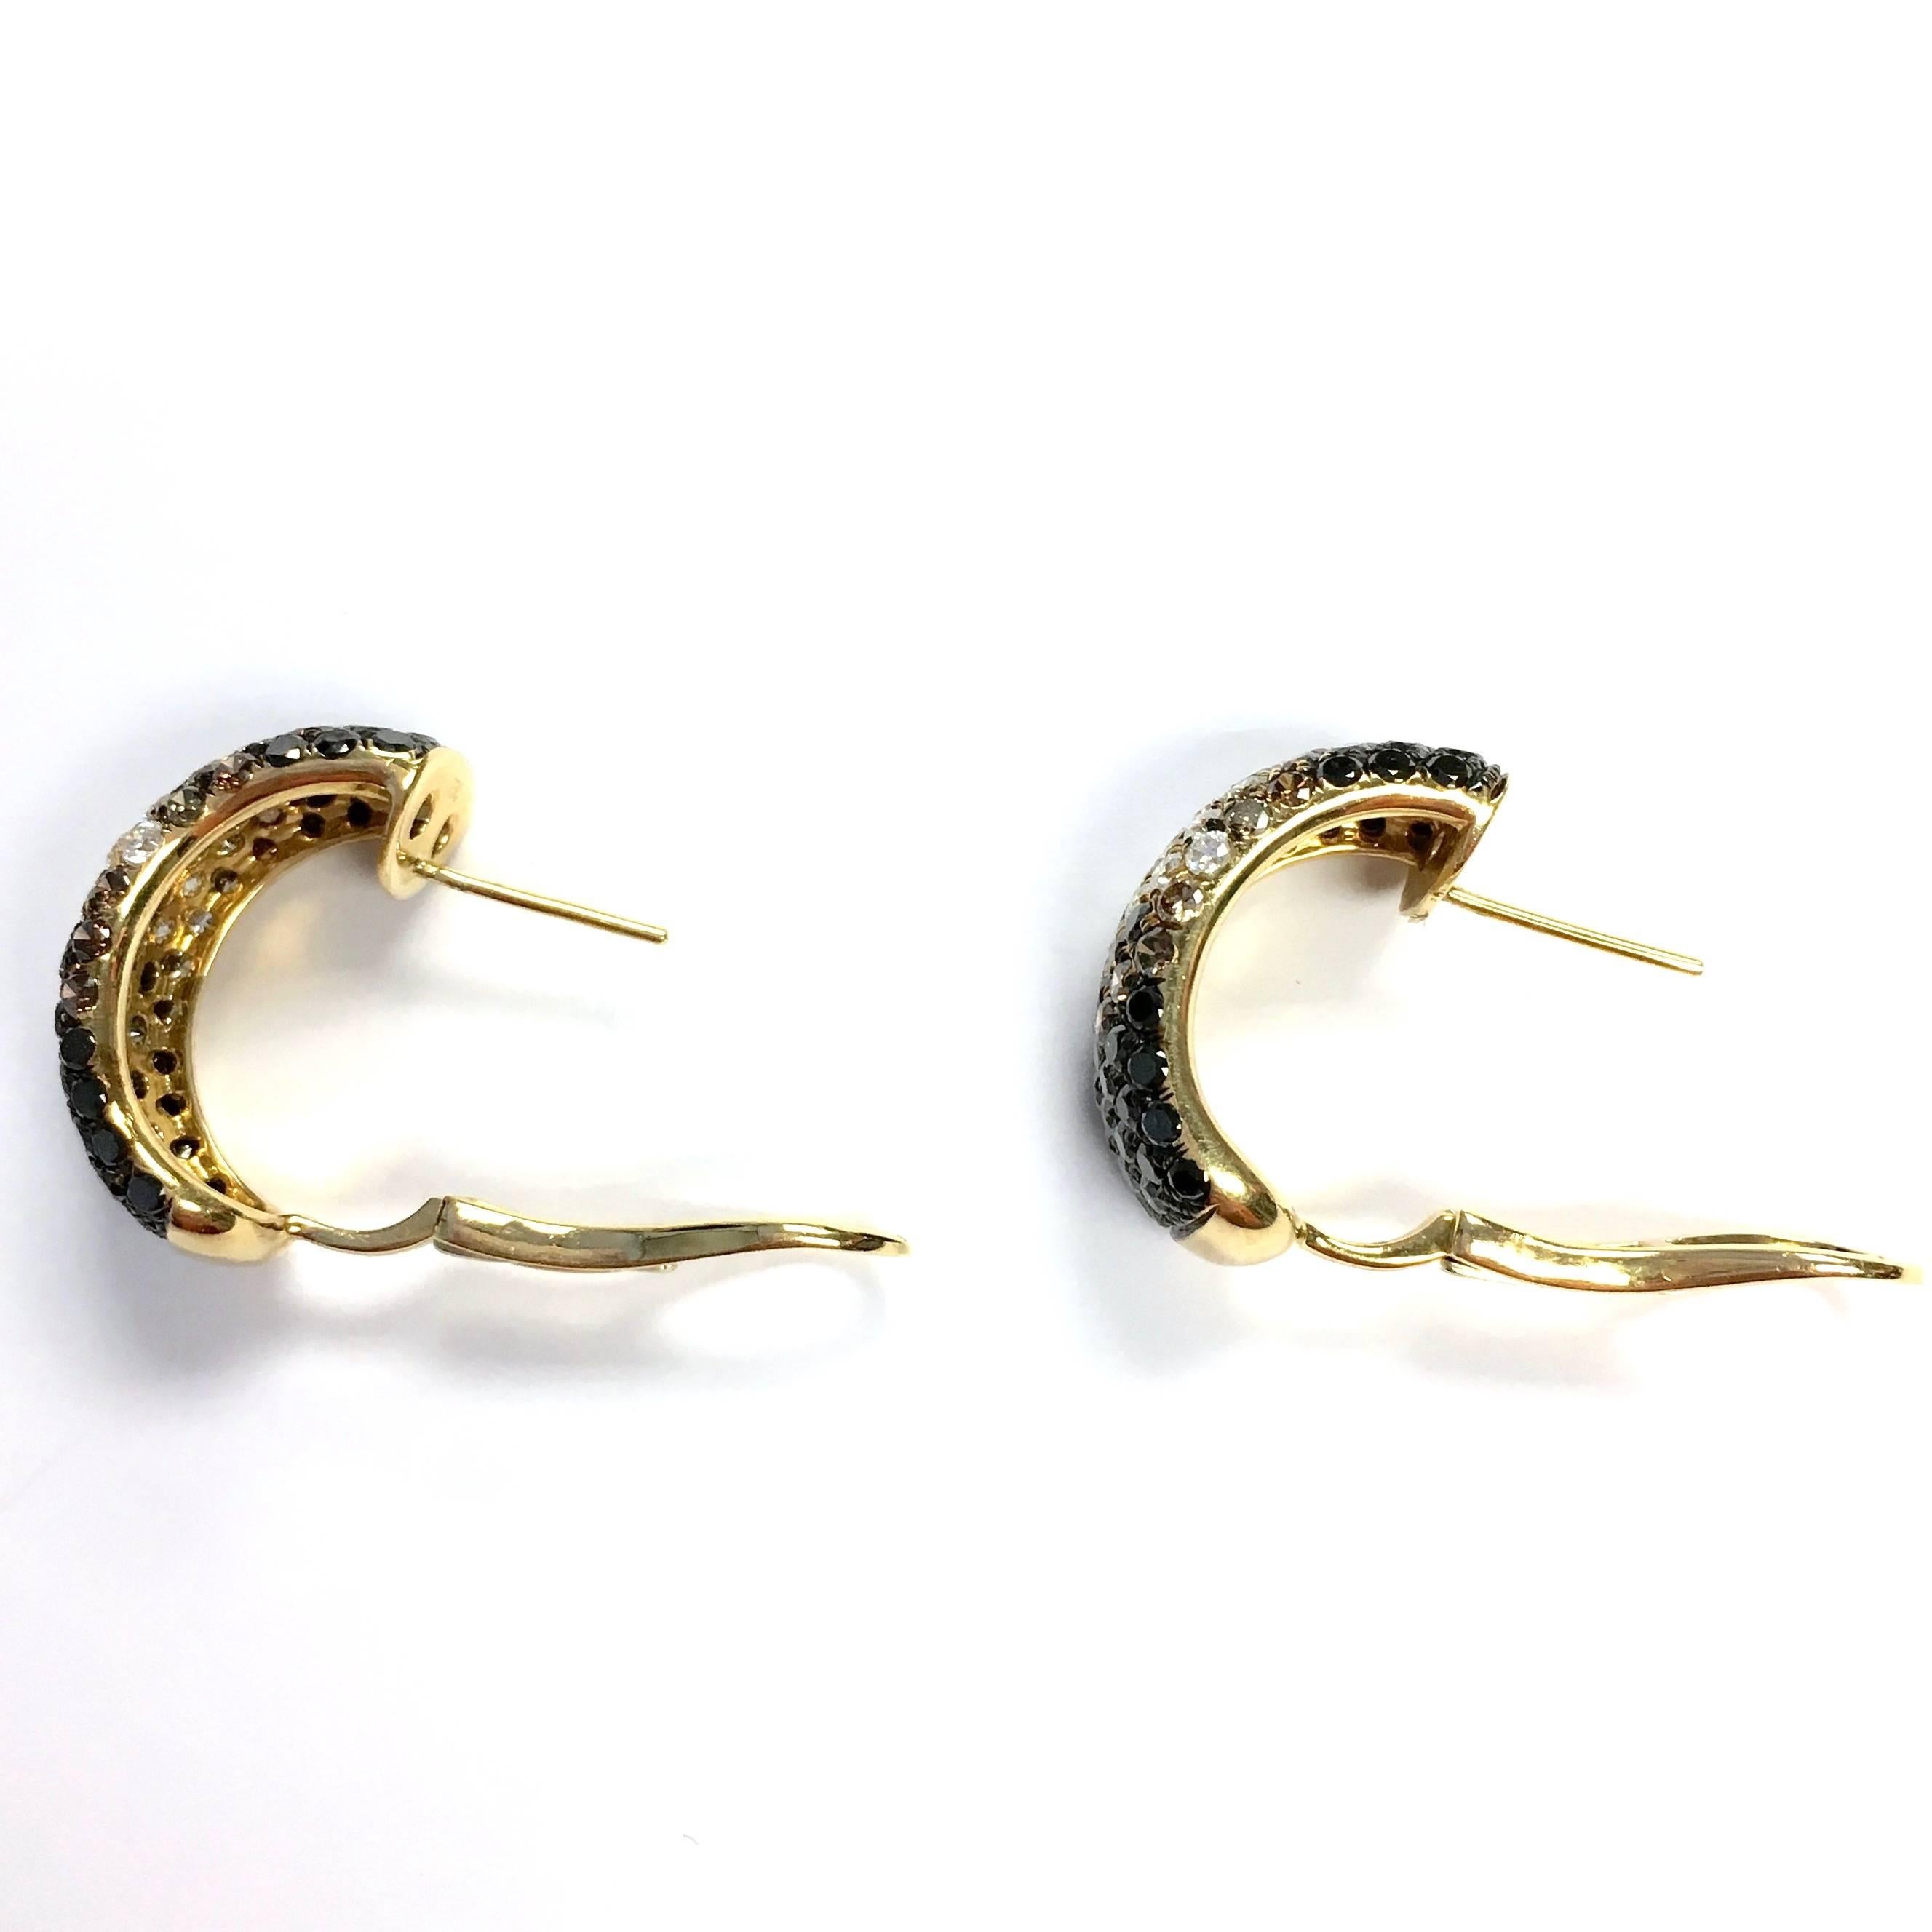 18K yellow gold 12 mm wide J-hoop earrings, pave set with 5.30 carats of high quality white, champagne, brown and black diamonds. The white diamonds are VS clarity, F-G color.  Post and omega backs.
Measurements: 23 mm L x 12 mm W
Weight: 11.7 grams